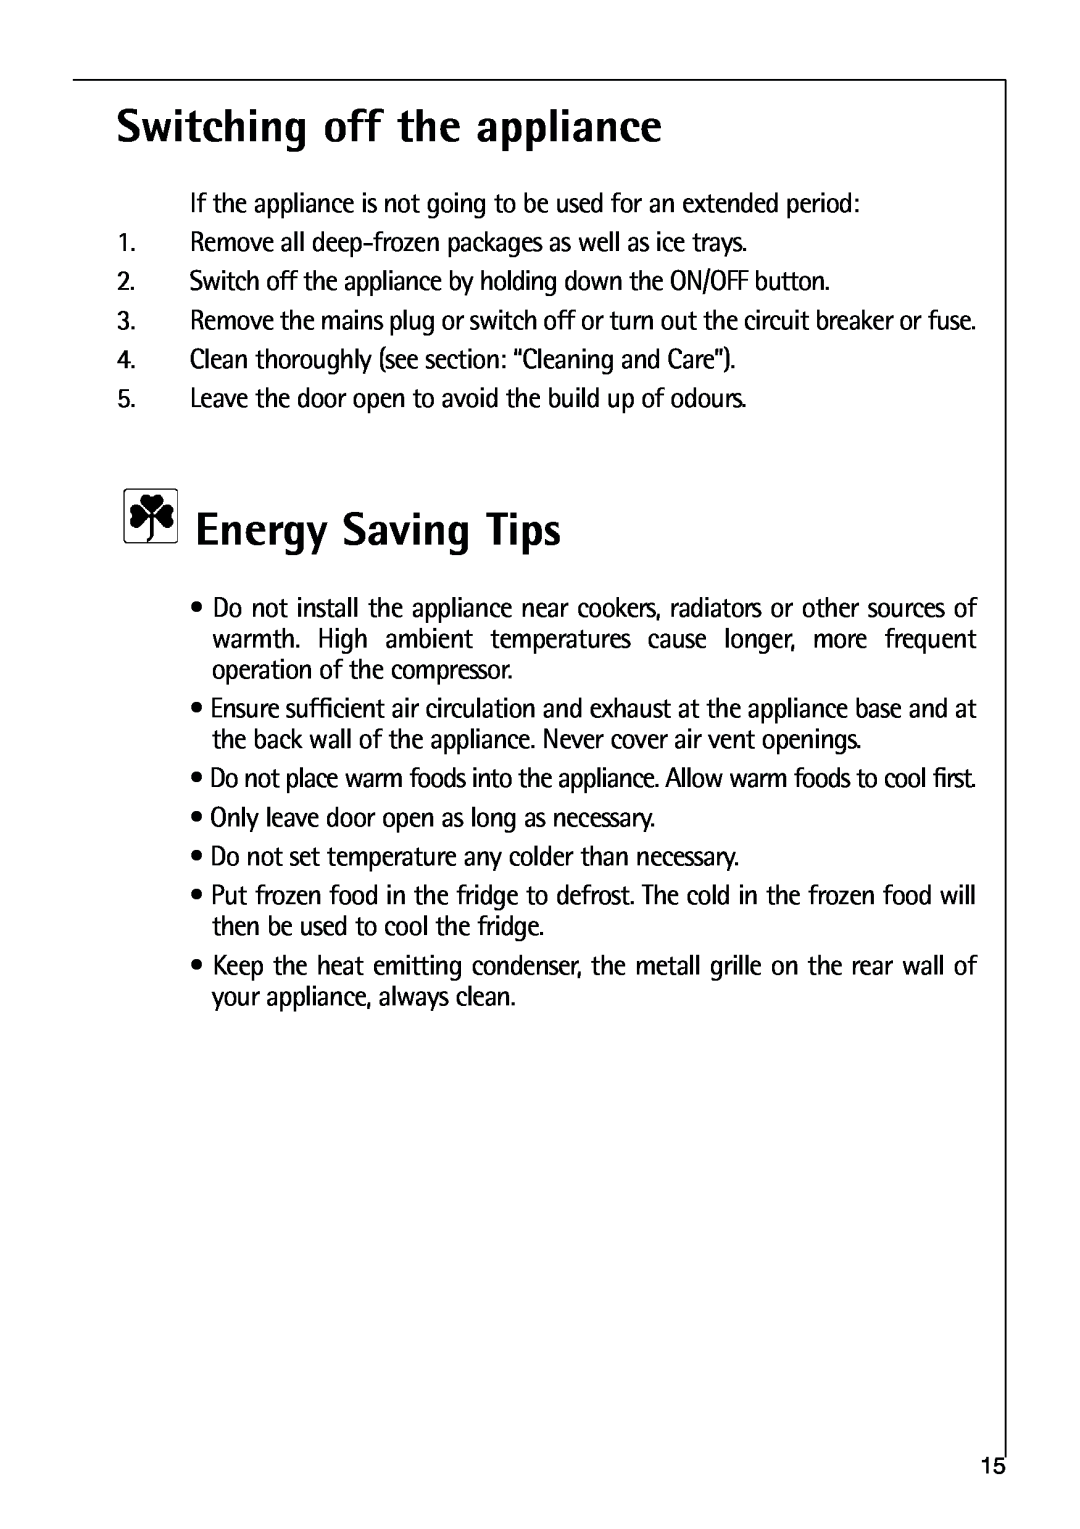 Electrolux 75270 GA user manual Switching off the appliance, Energy Saving Tips 